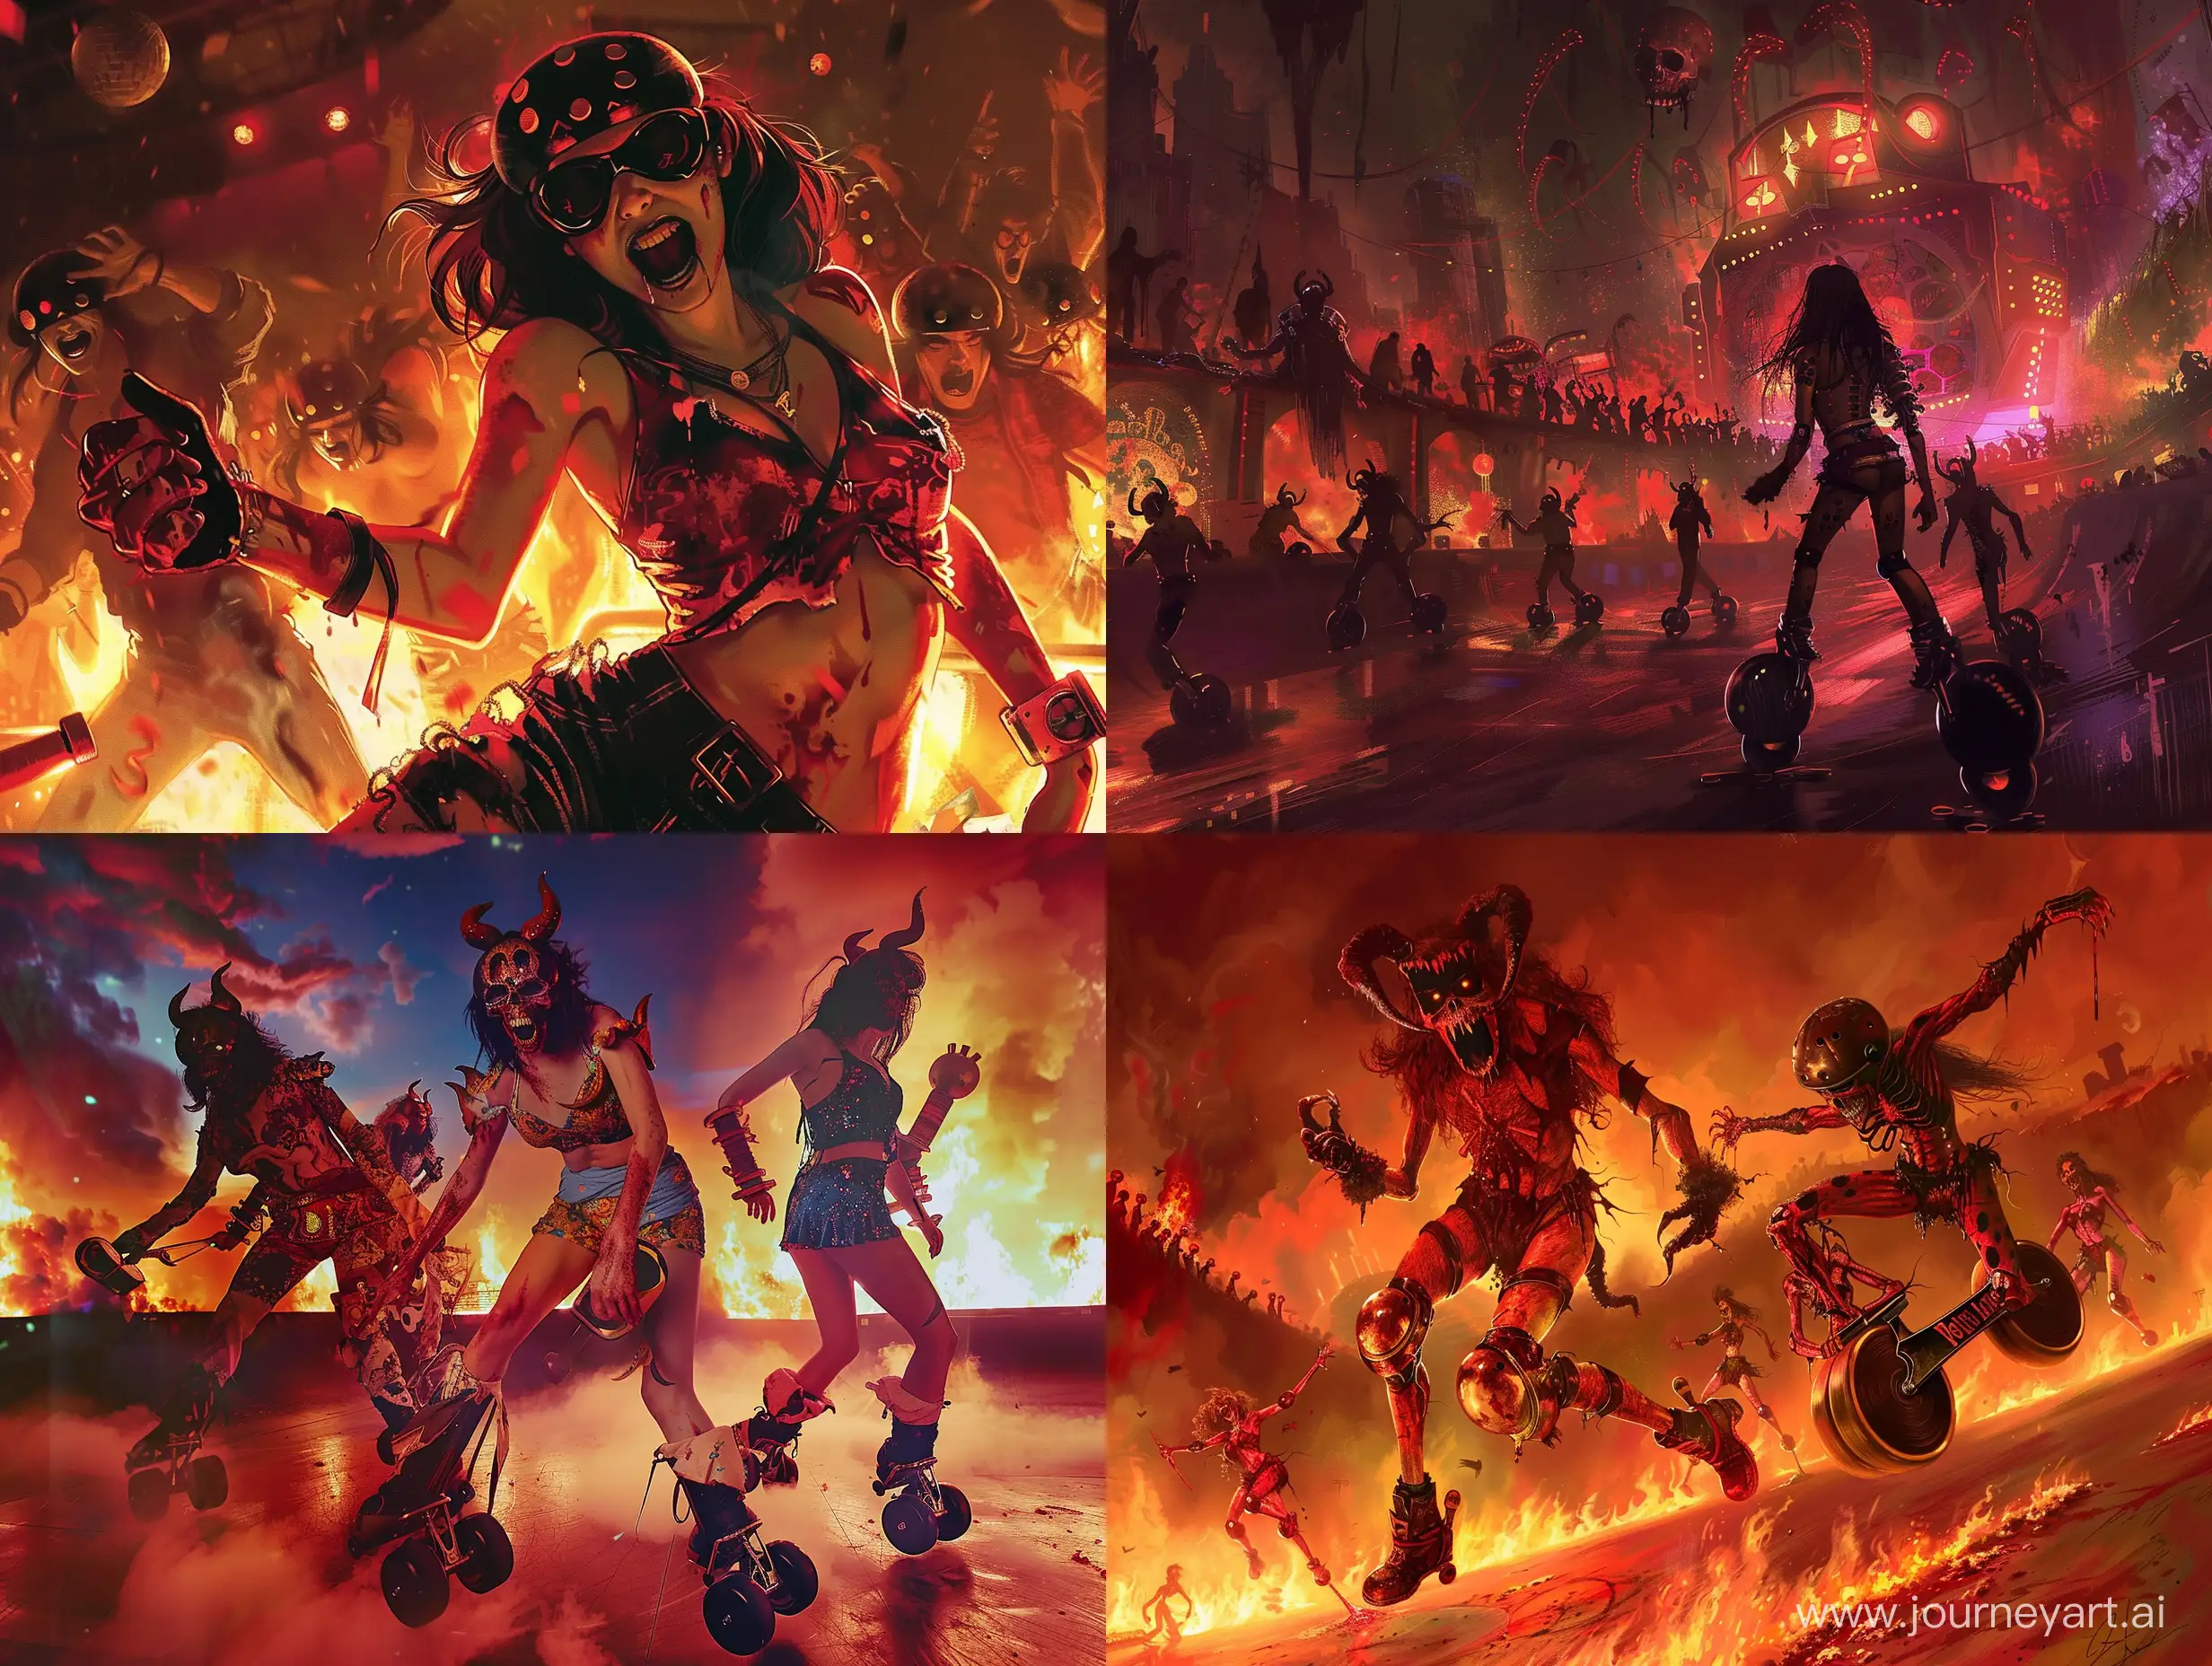 roller disco party in hell heavy symbolism ar Image